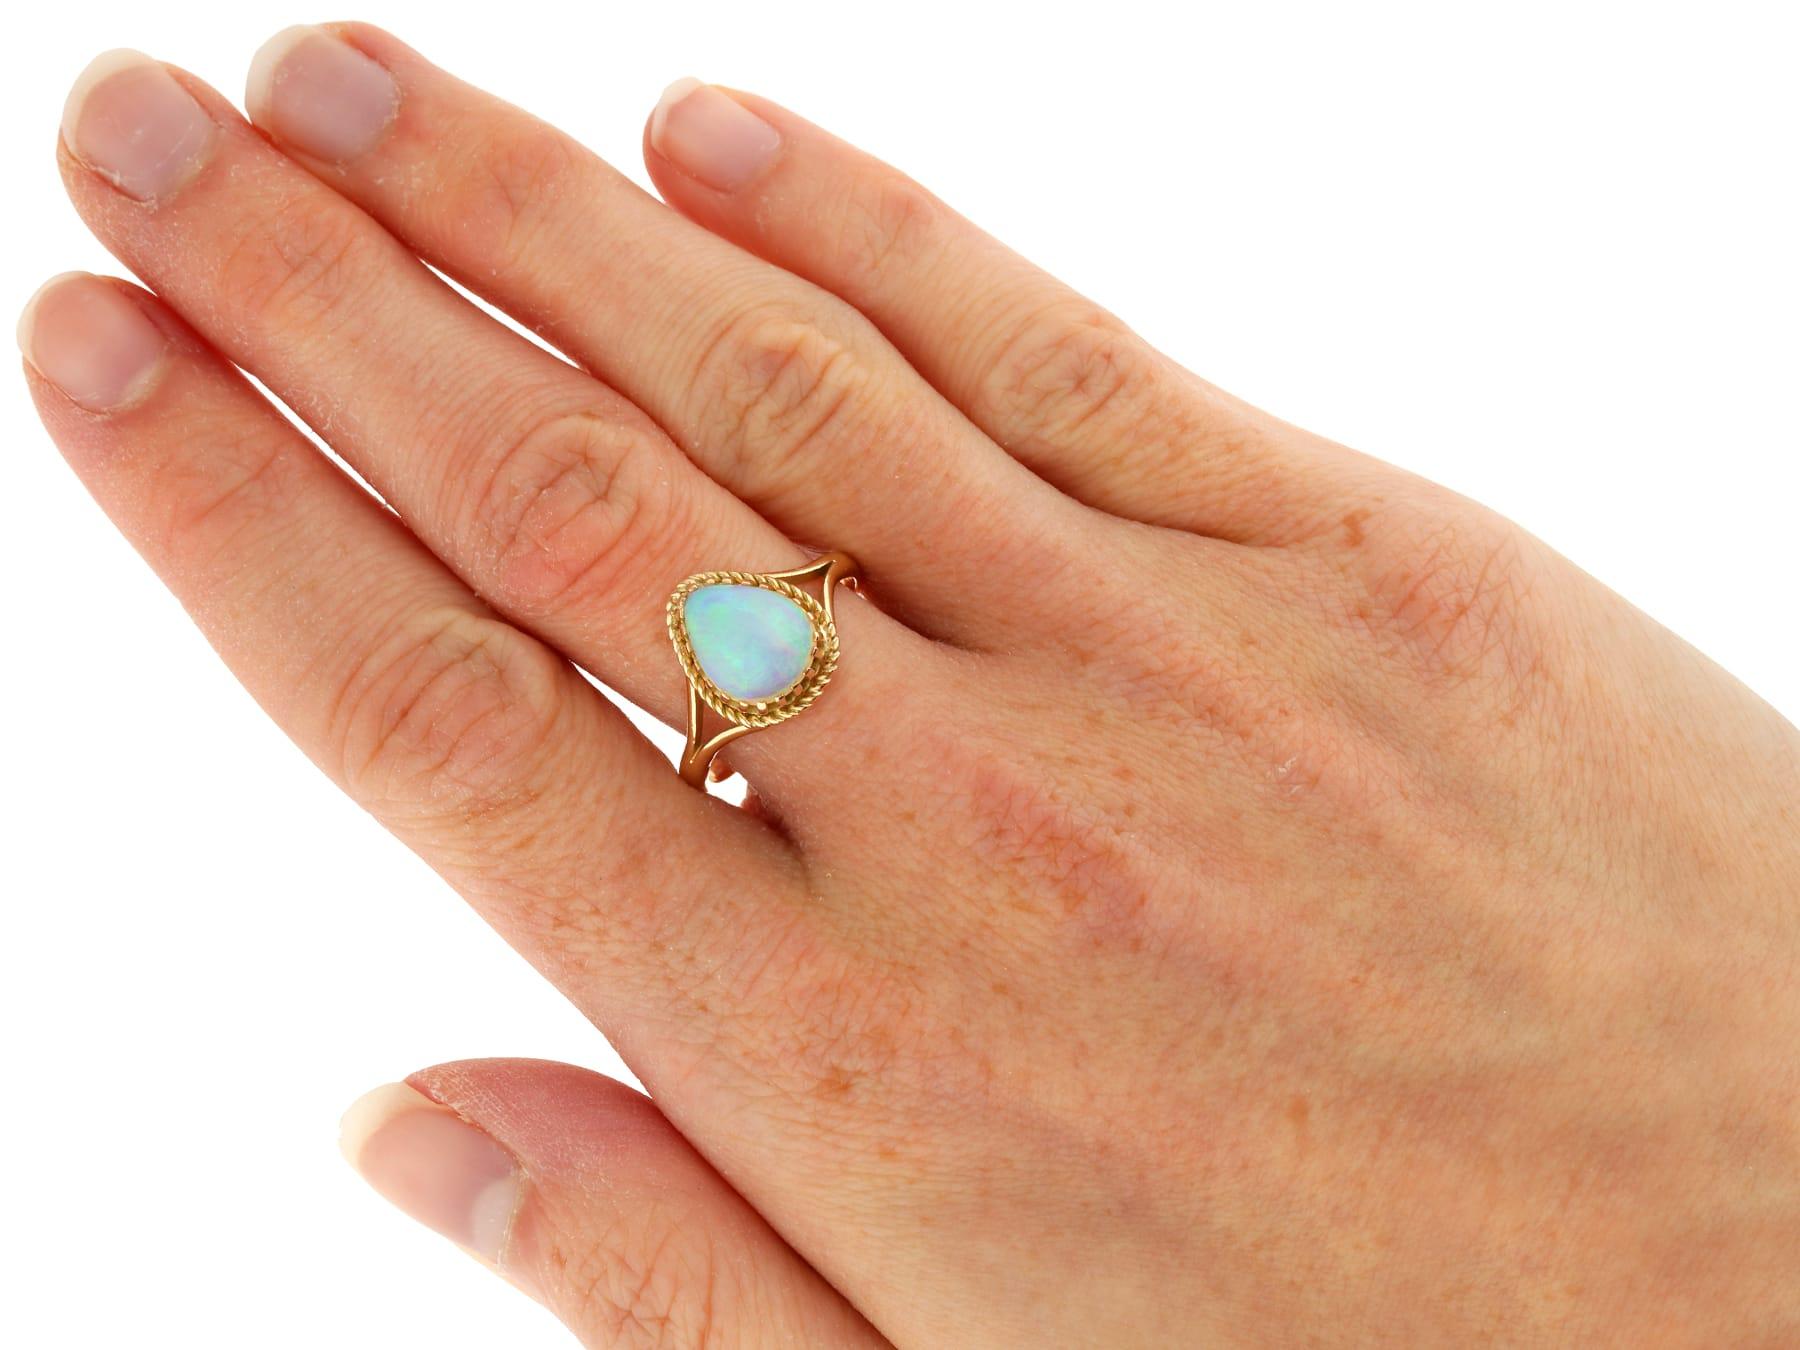 Vintage 1.80ct Opal and 9k Yellow Gold Ring Circa 1950 For Sale 2